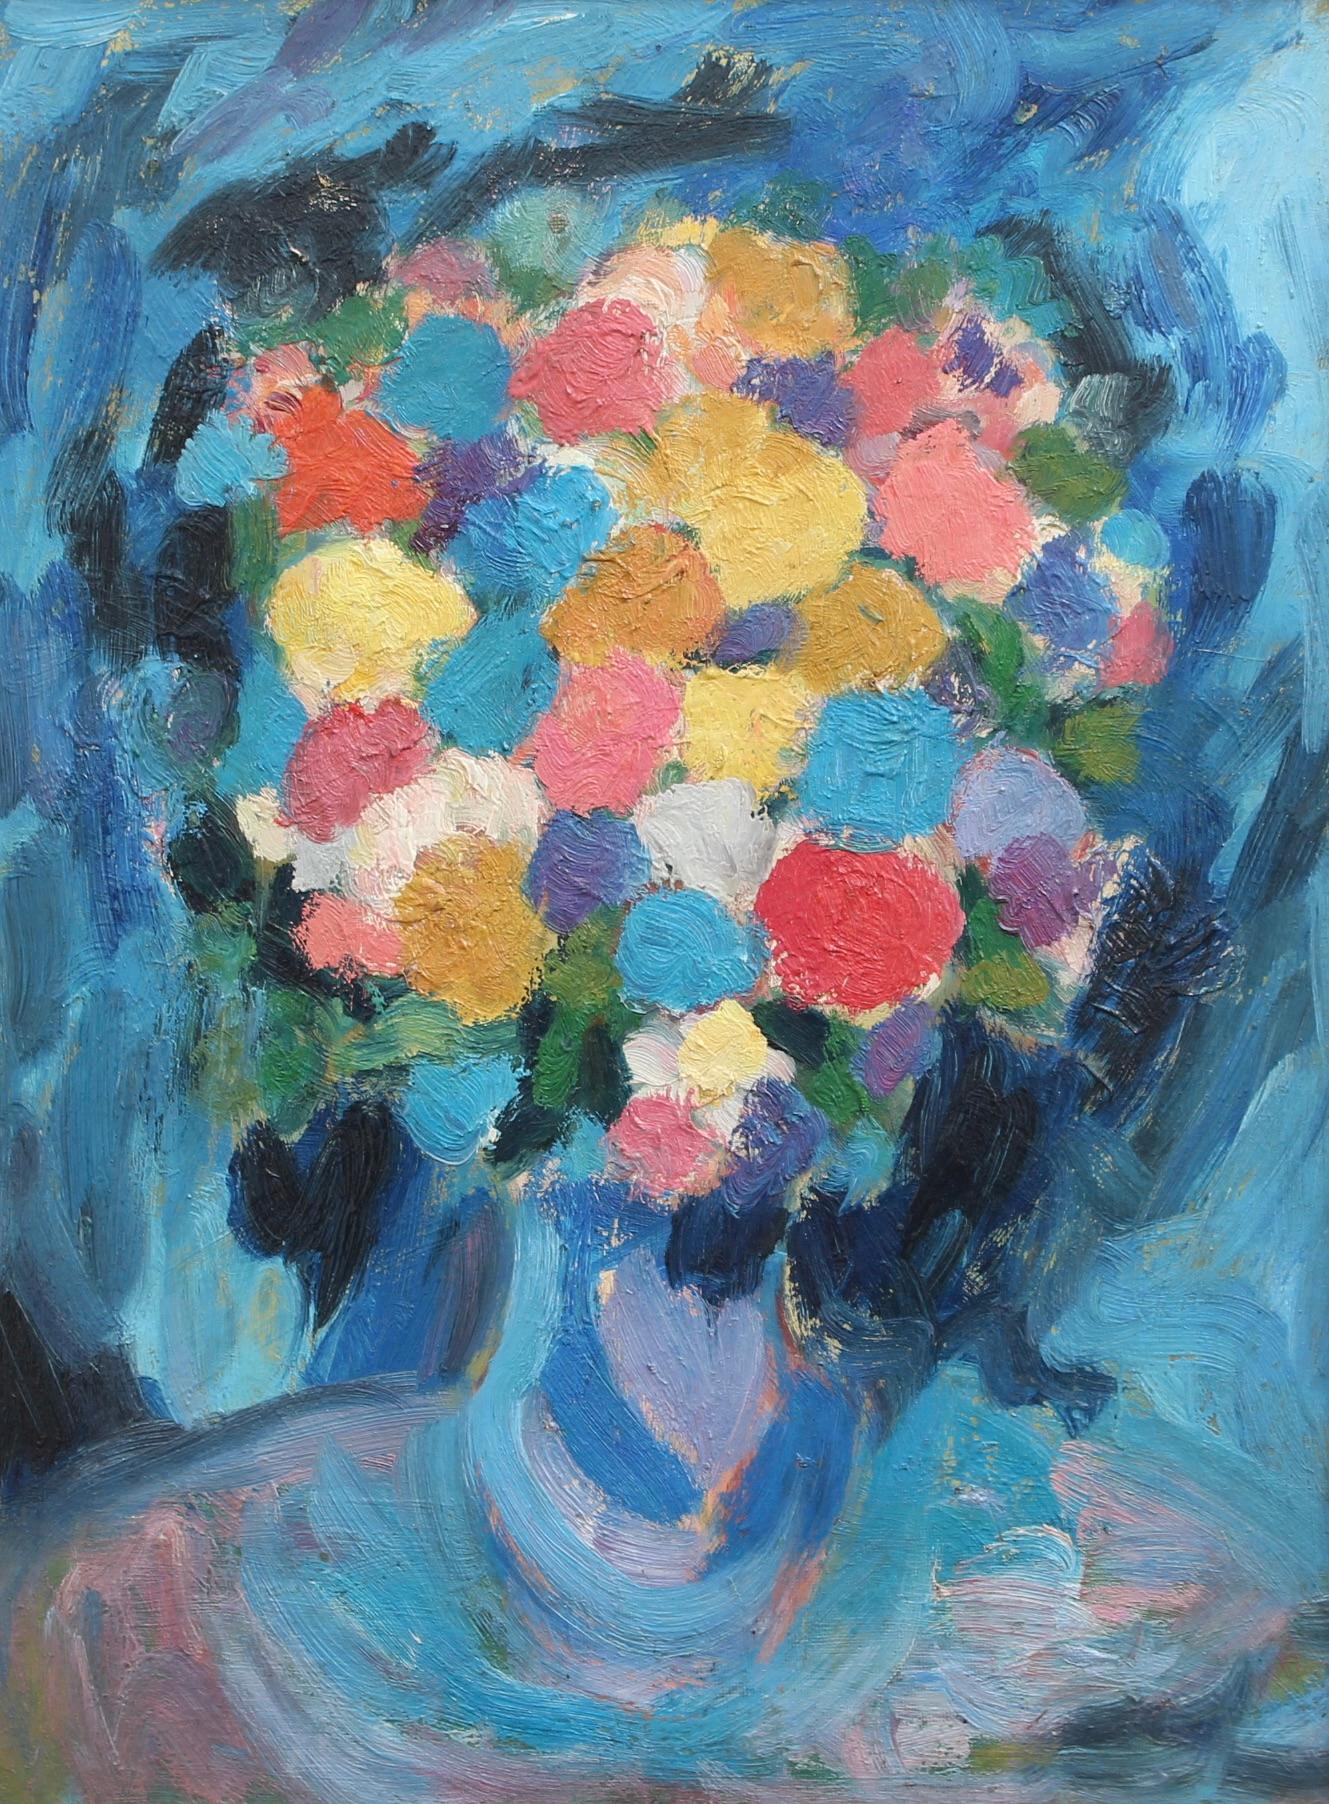 Still Life in Bleu - Painting by Anna Costa